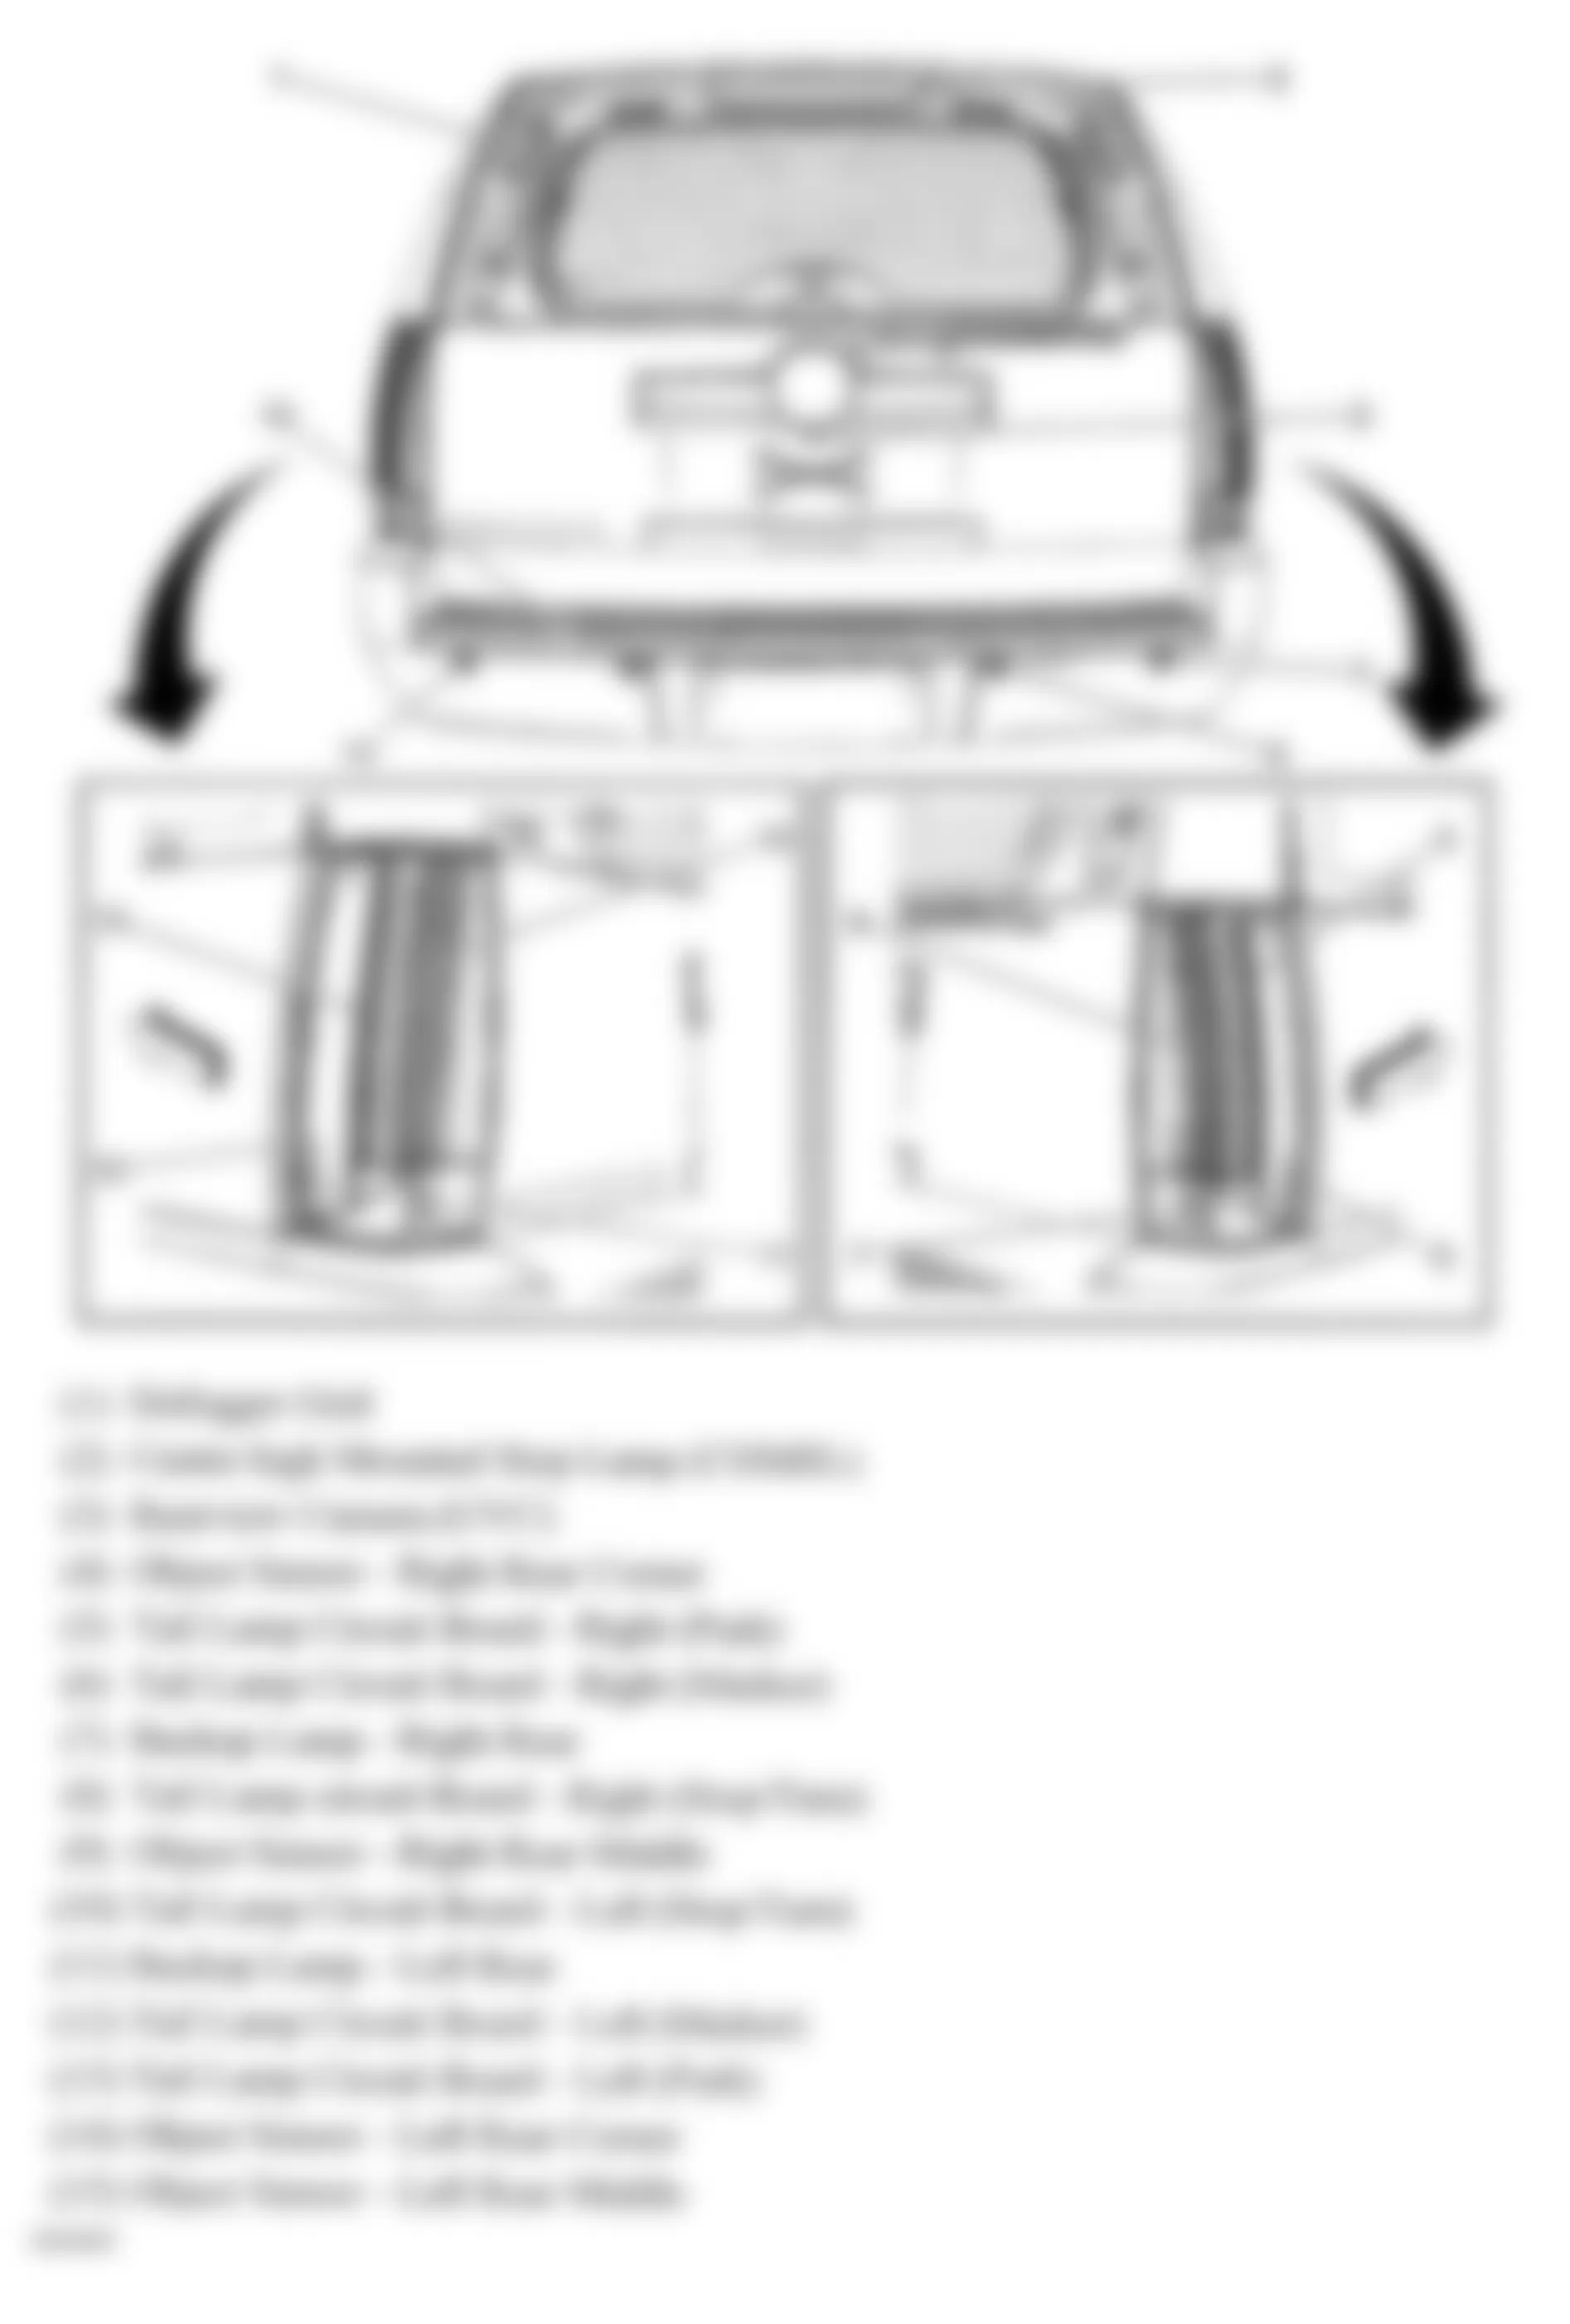 GMC Yukon XL C1500 2007 - Component Locations -  Rear Of Vehicle (Tahoe & Escalade W/One Piece Liftgate)